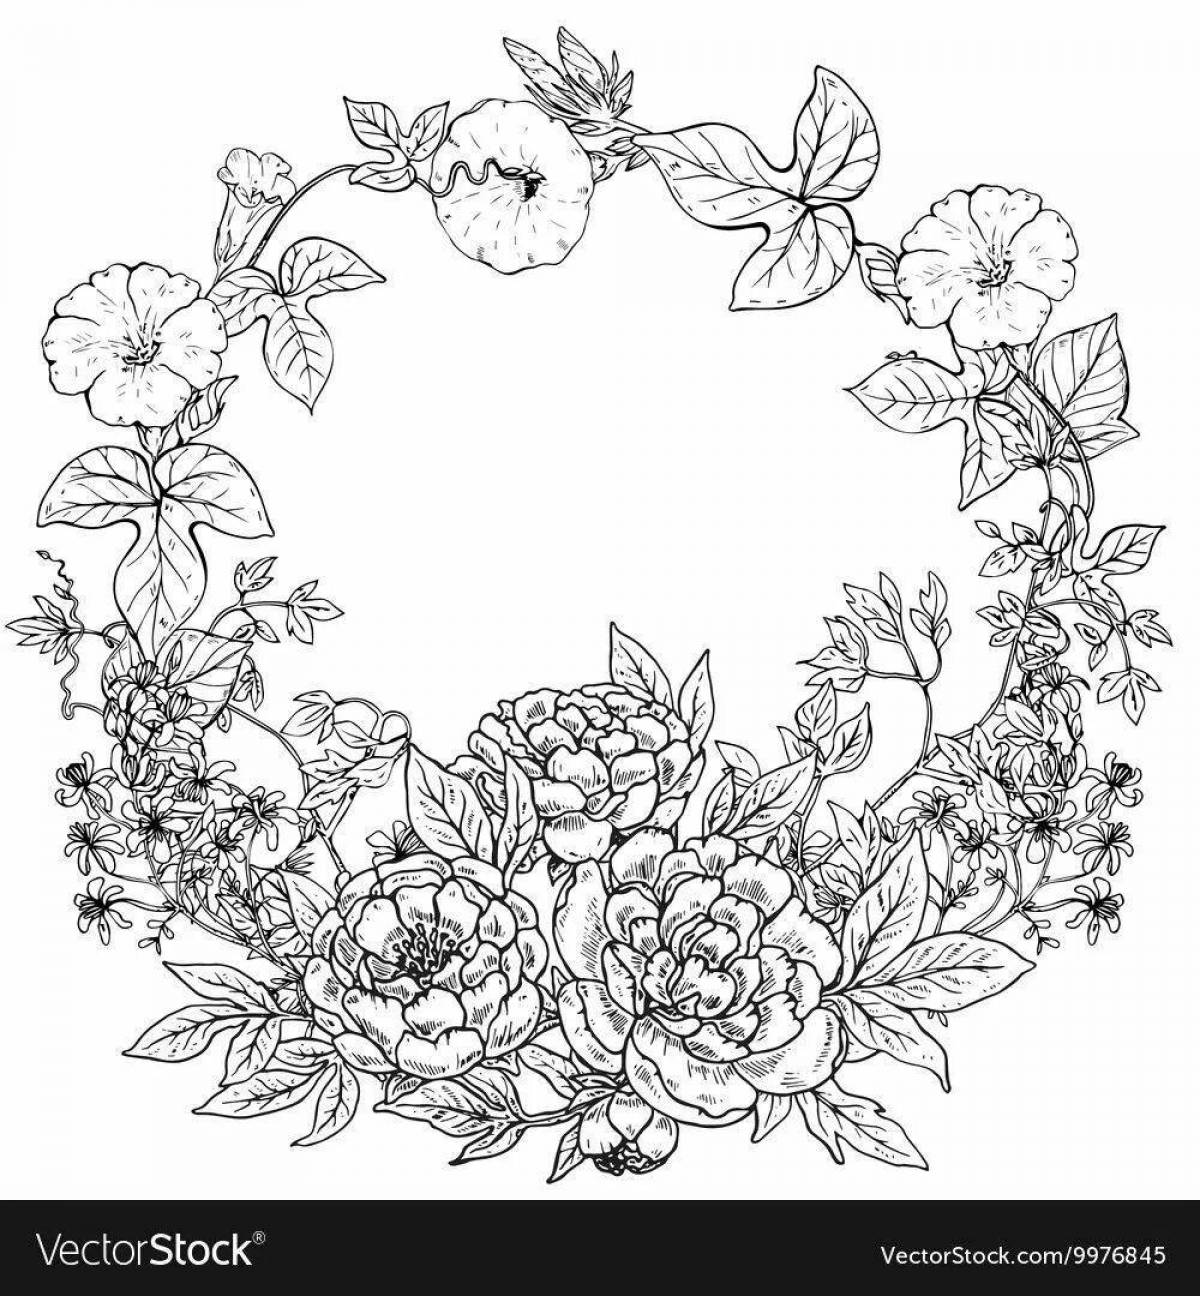 Coloring page delightful wreath of flowers